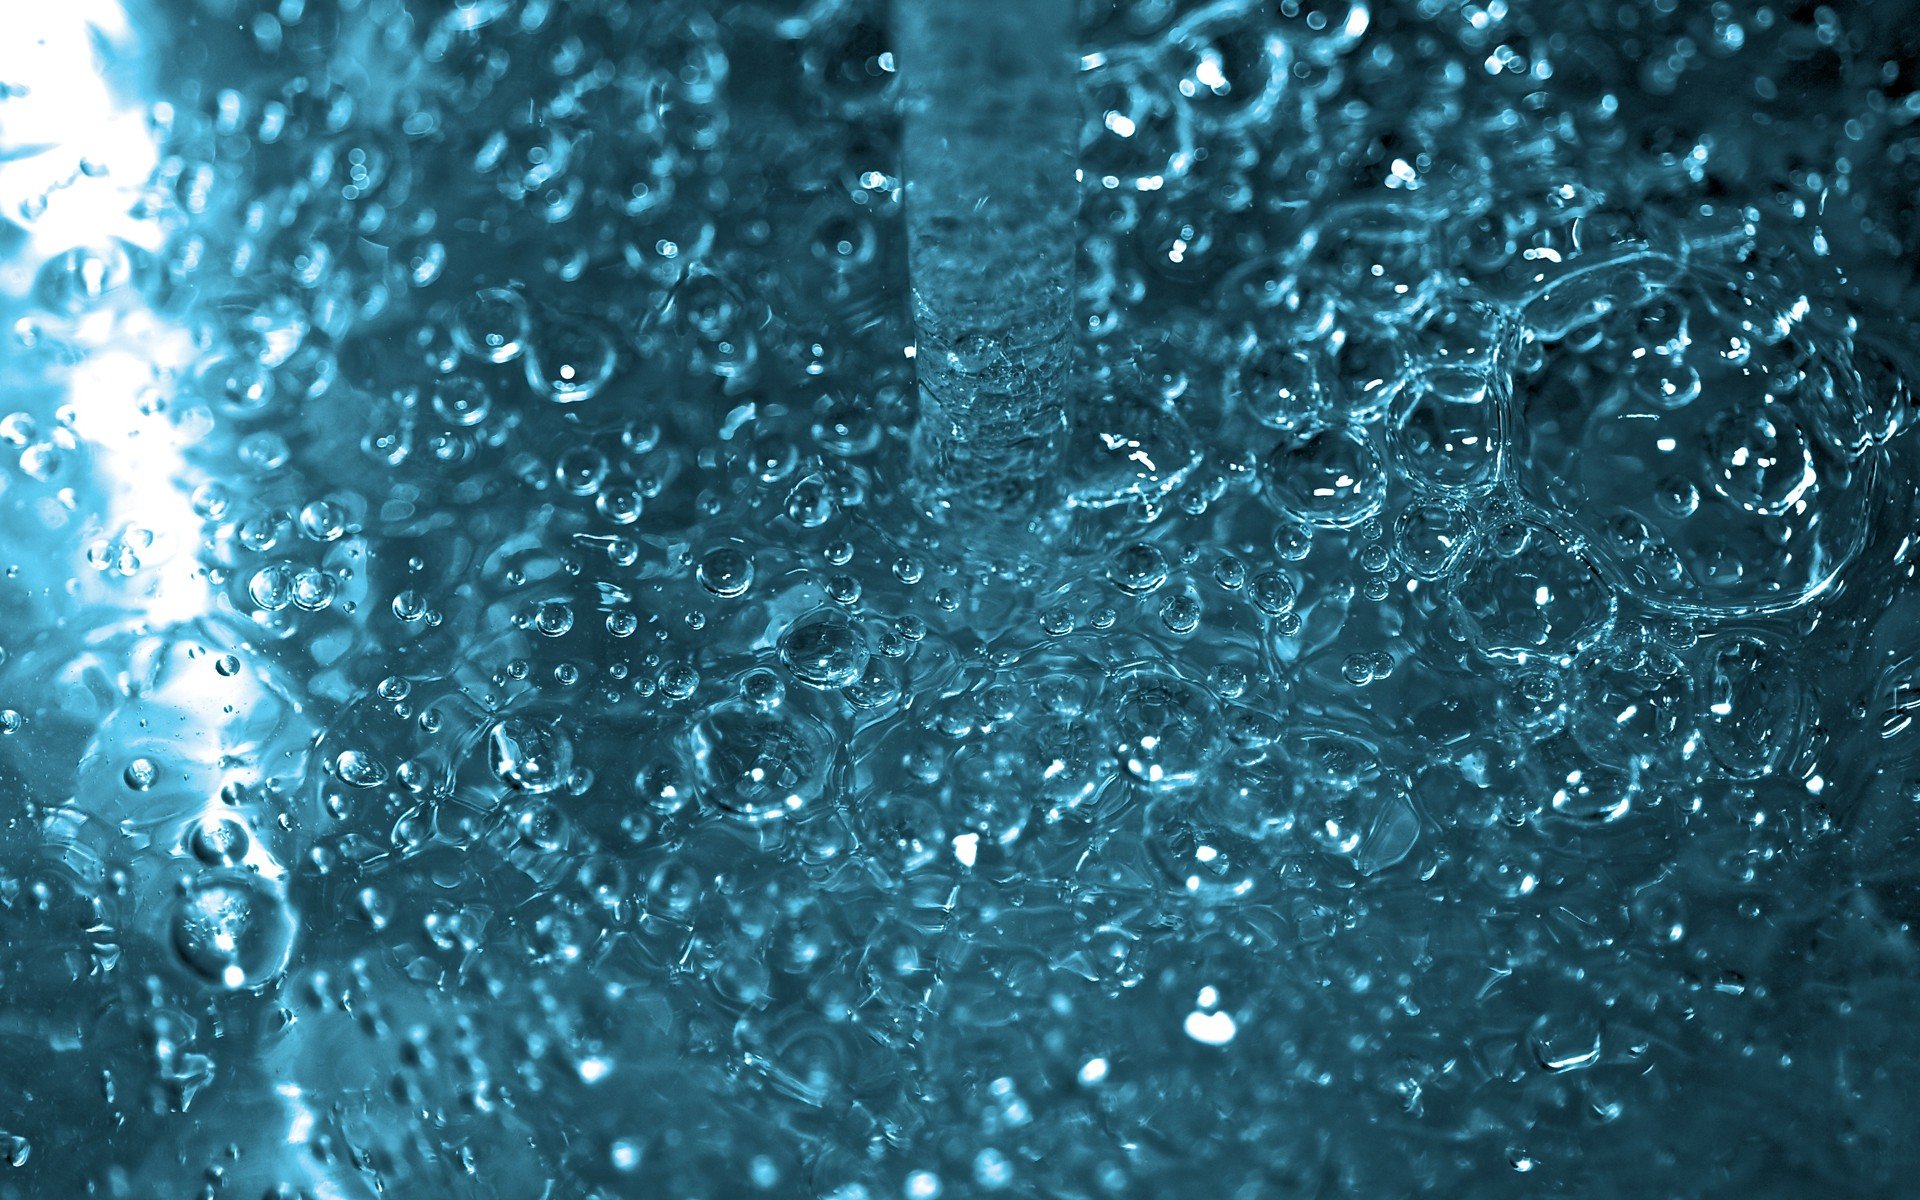 Water Textures 46 High resolution Photos and Wallpapers Elsoar